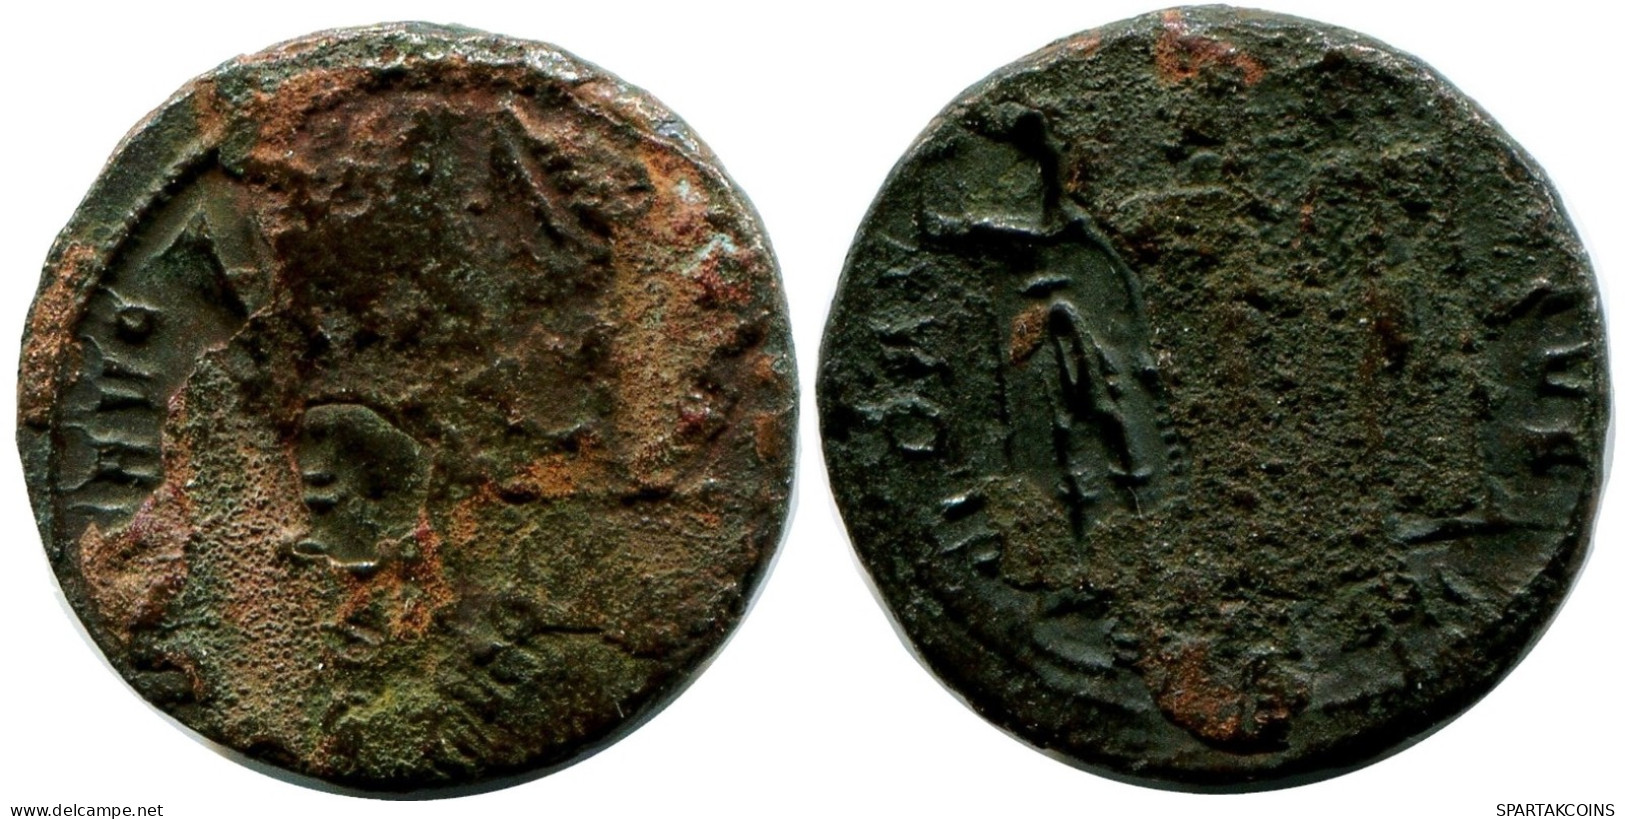 CONSTANTINE I MINTED IN THESSALONICA FOUND IN IHNASYAH HOARD #ANC11120.14.E.A - El Imperio Christiano (307 / 363)